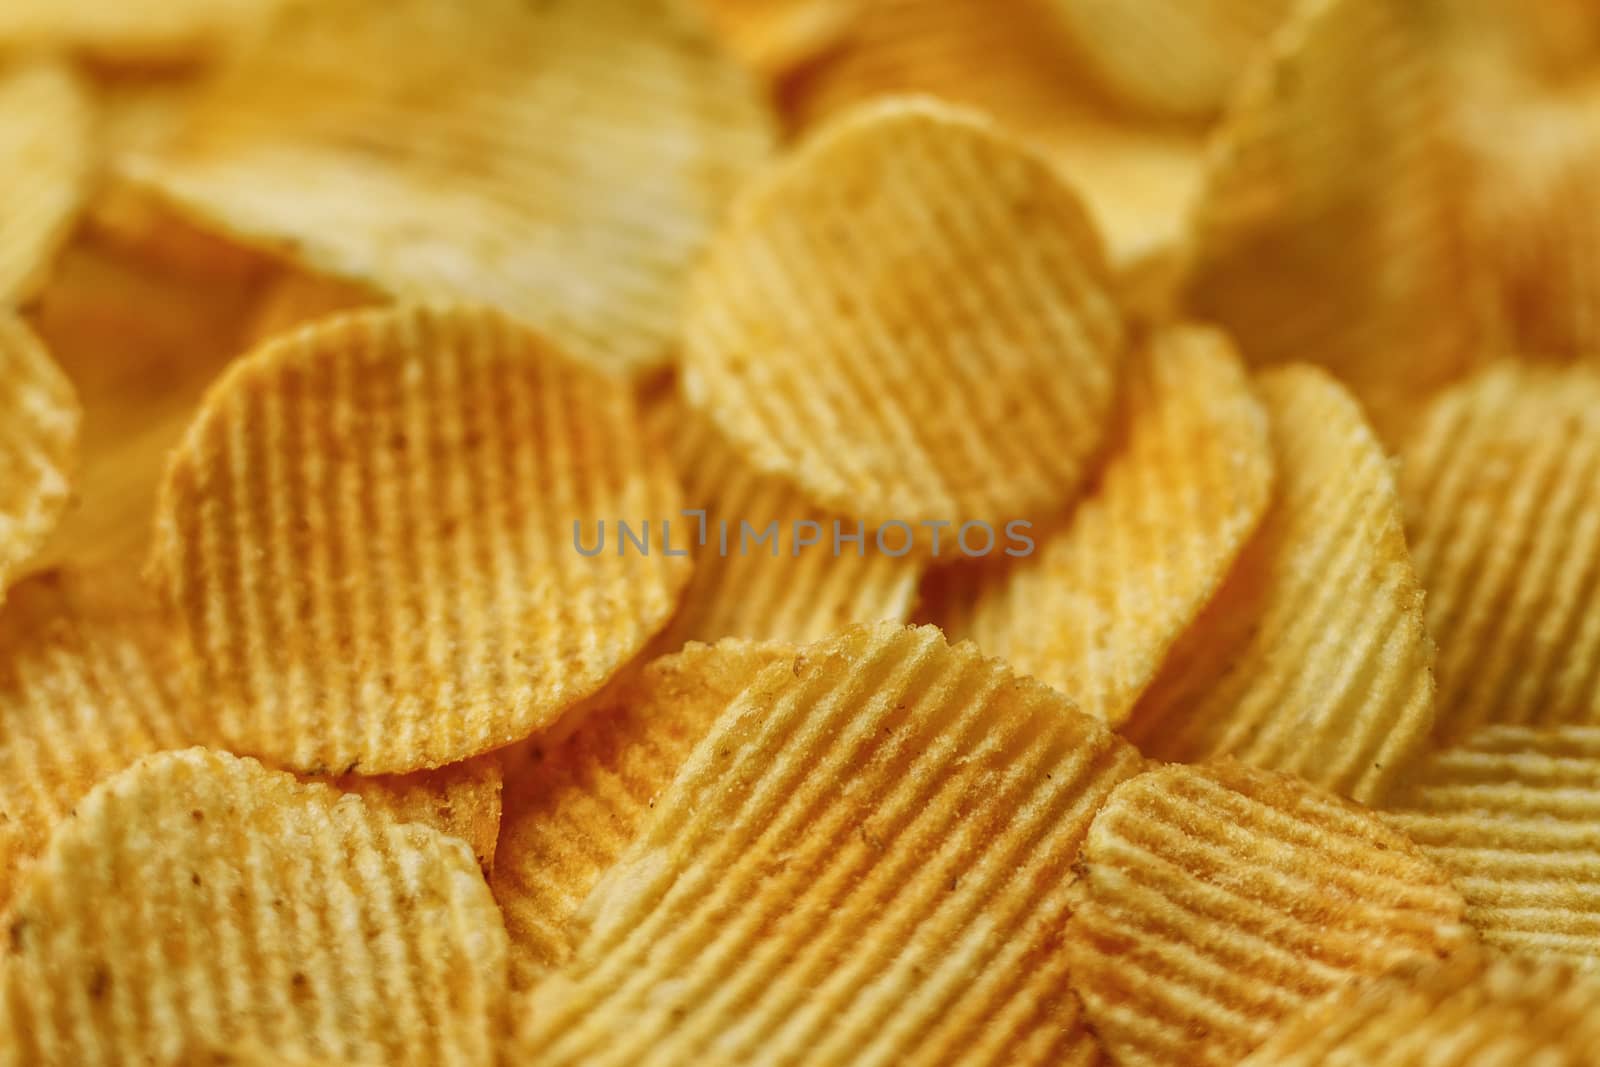 Corrugated Potato Chips. Food background. Top view